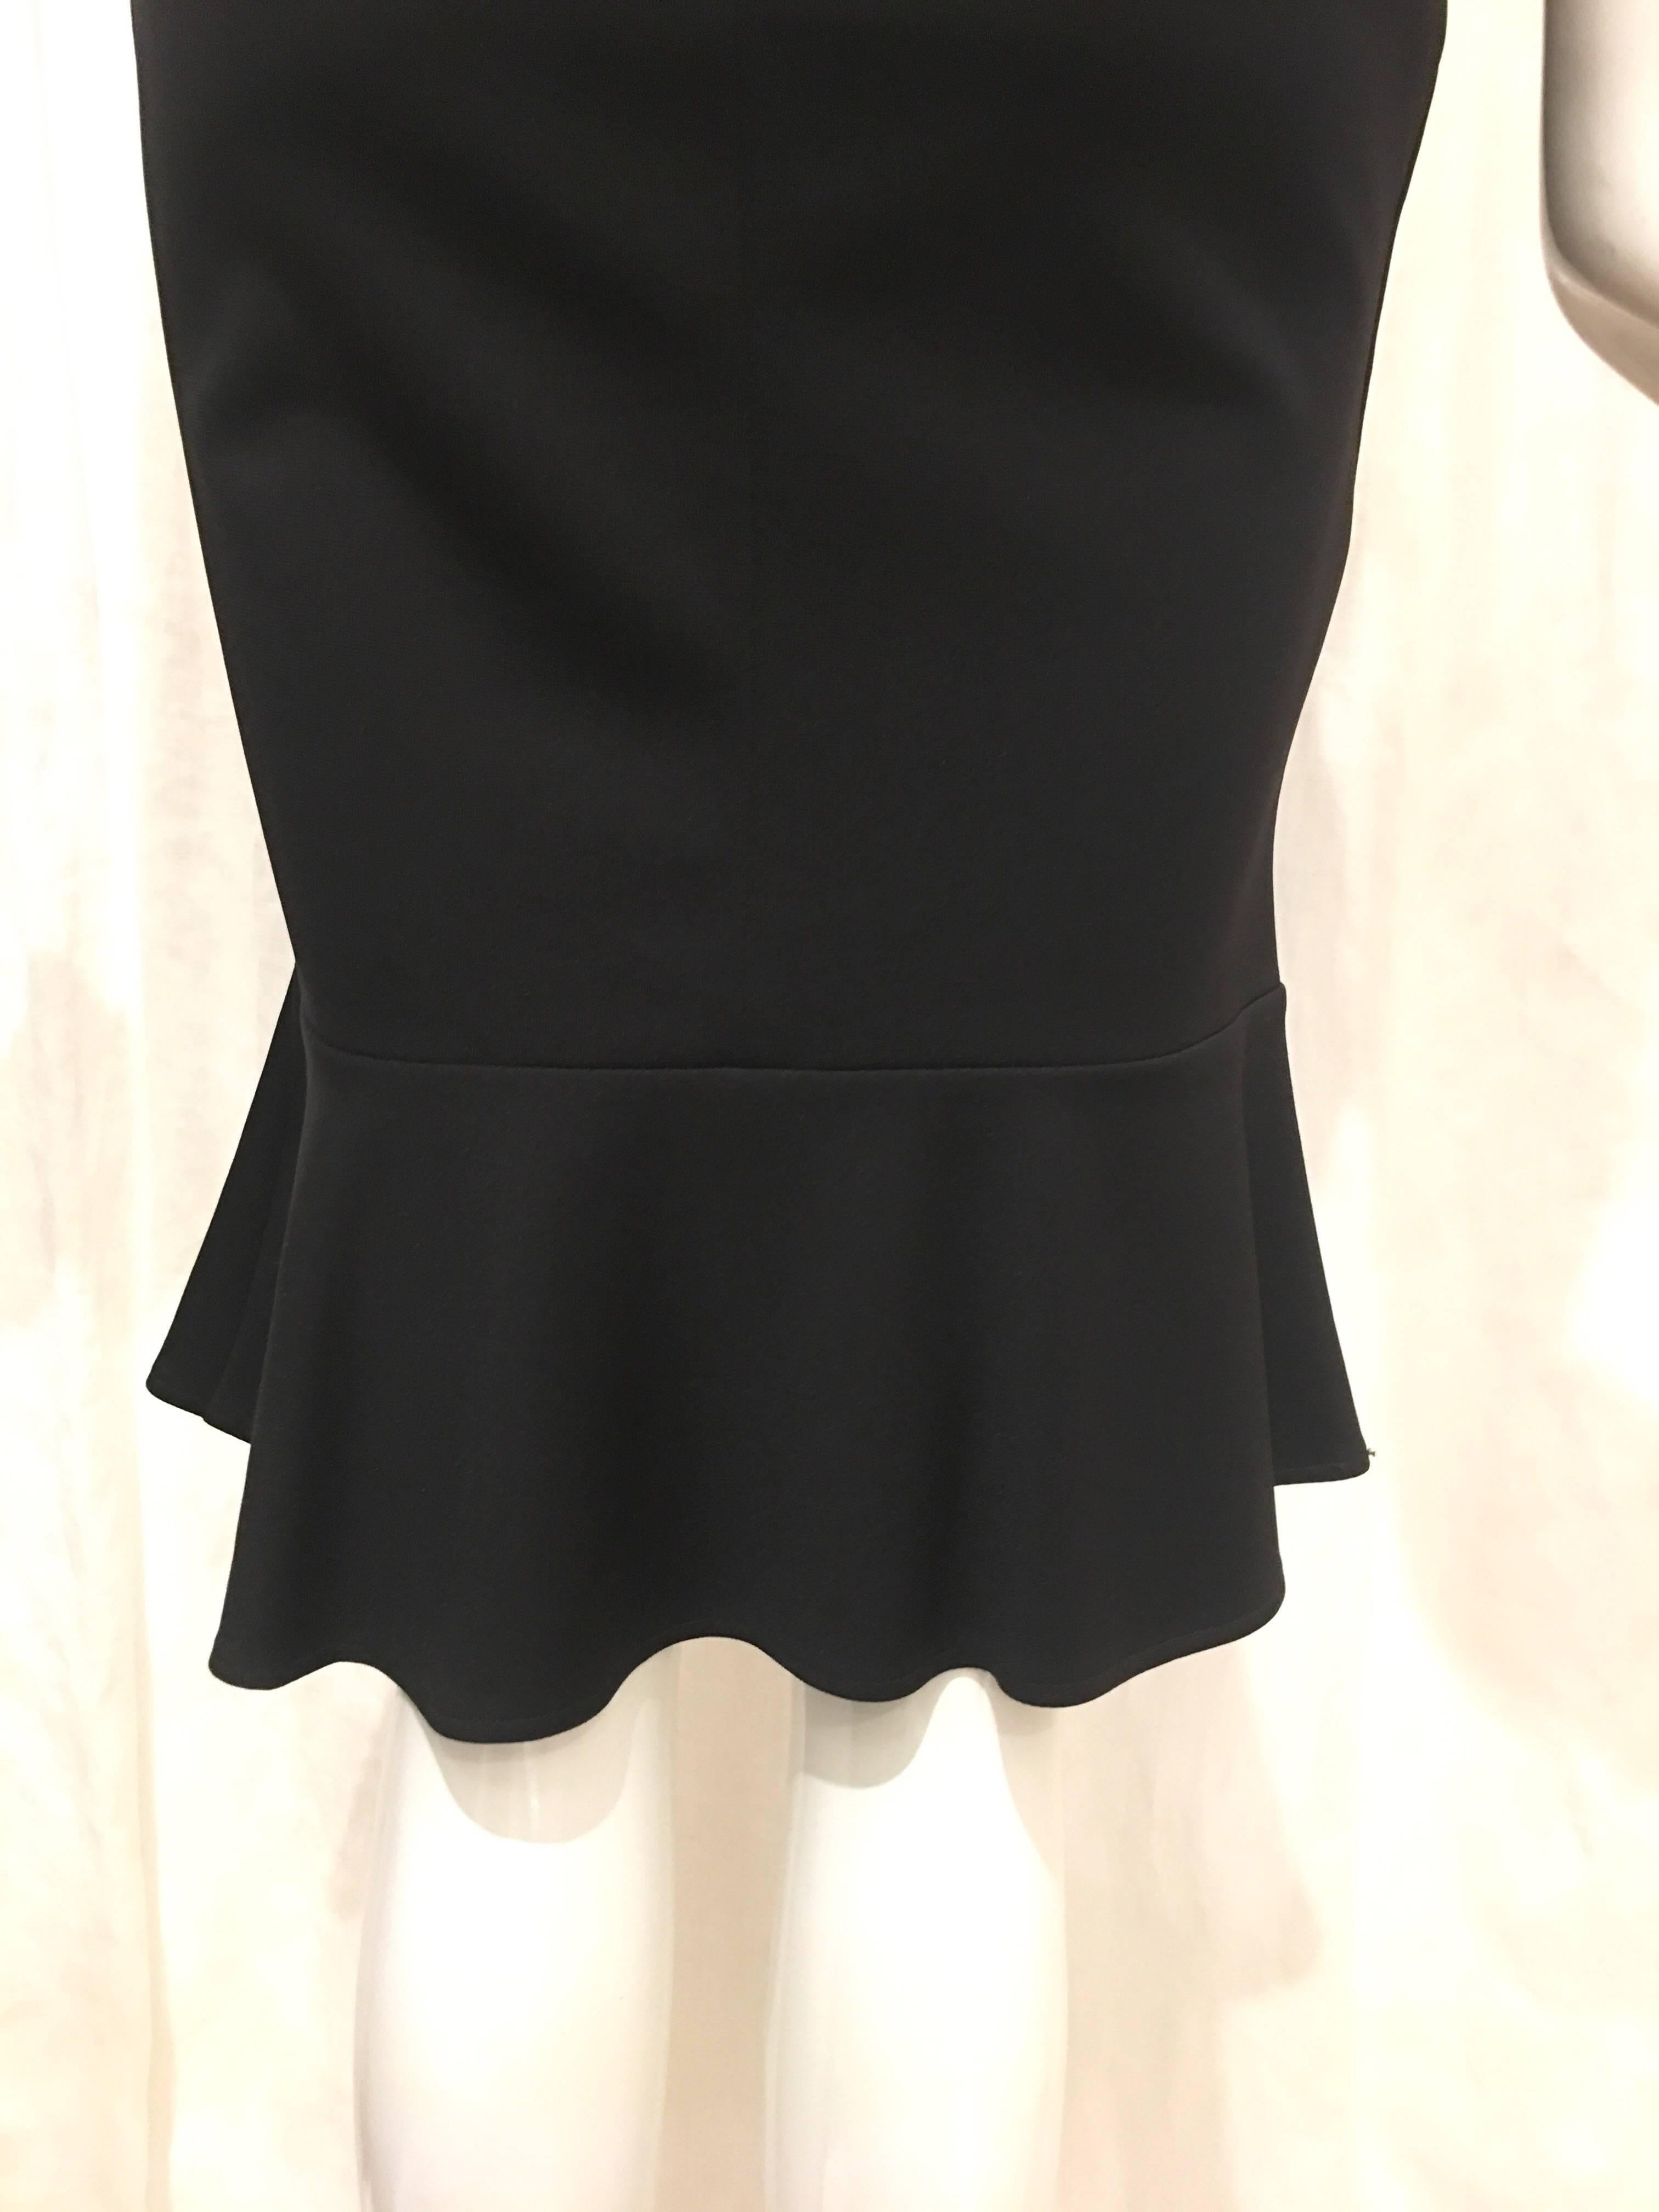 Dolce & Gabbana Little Black Dress with Ruffle Trim In Excellent Condition For Sale In Brooklyn, NY